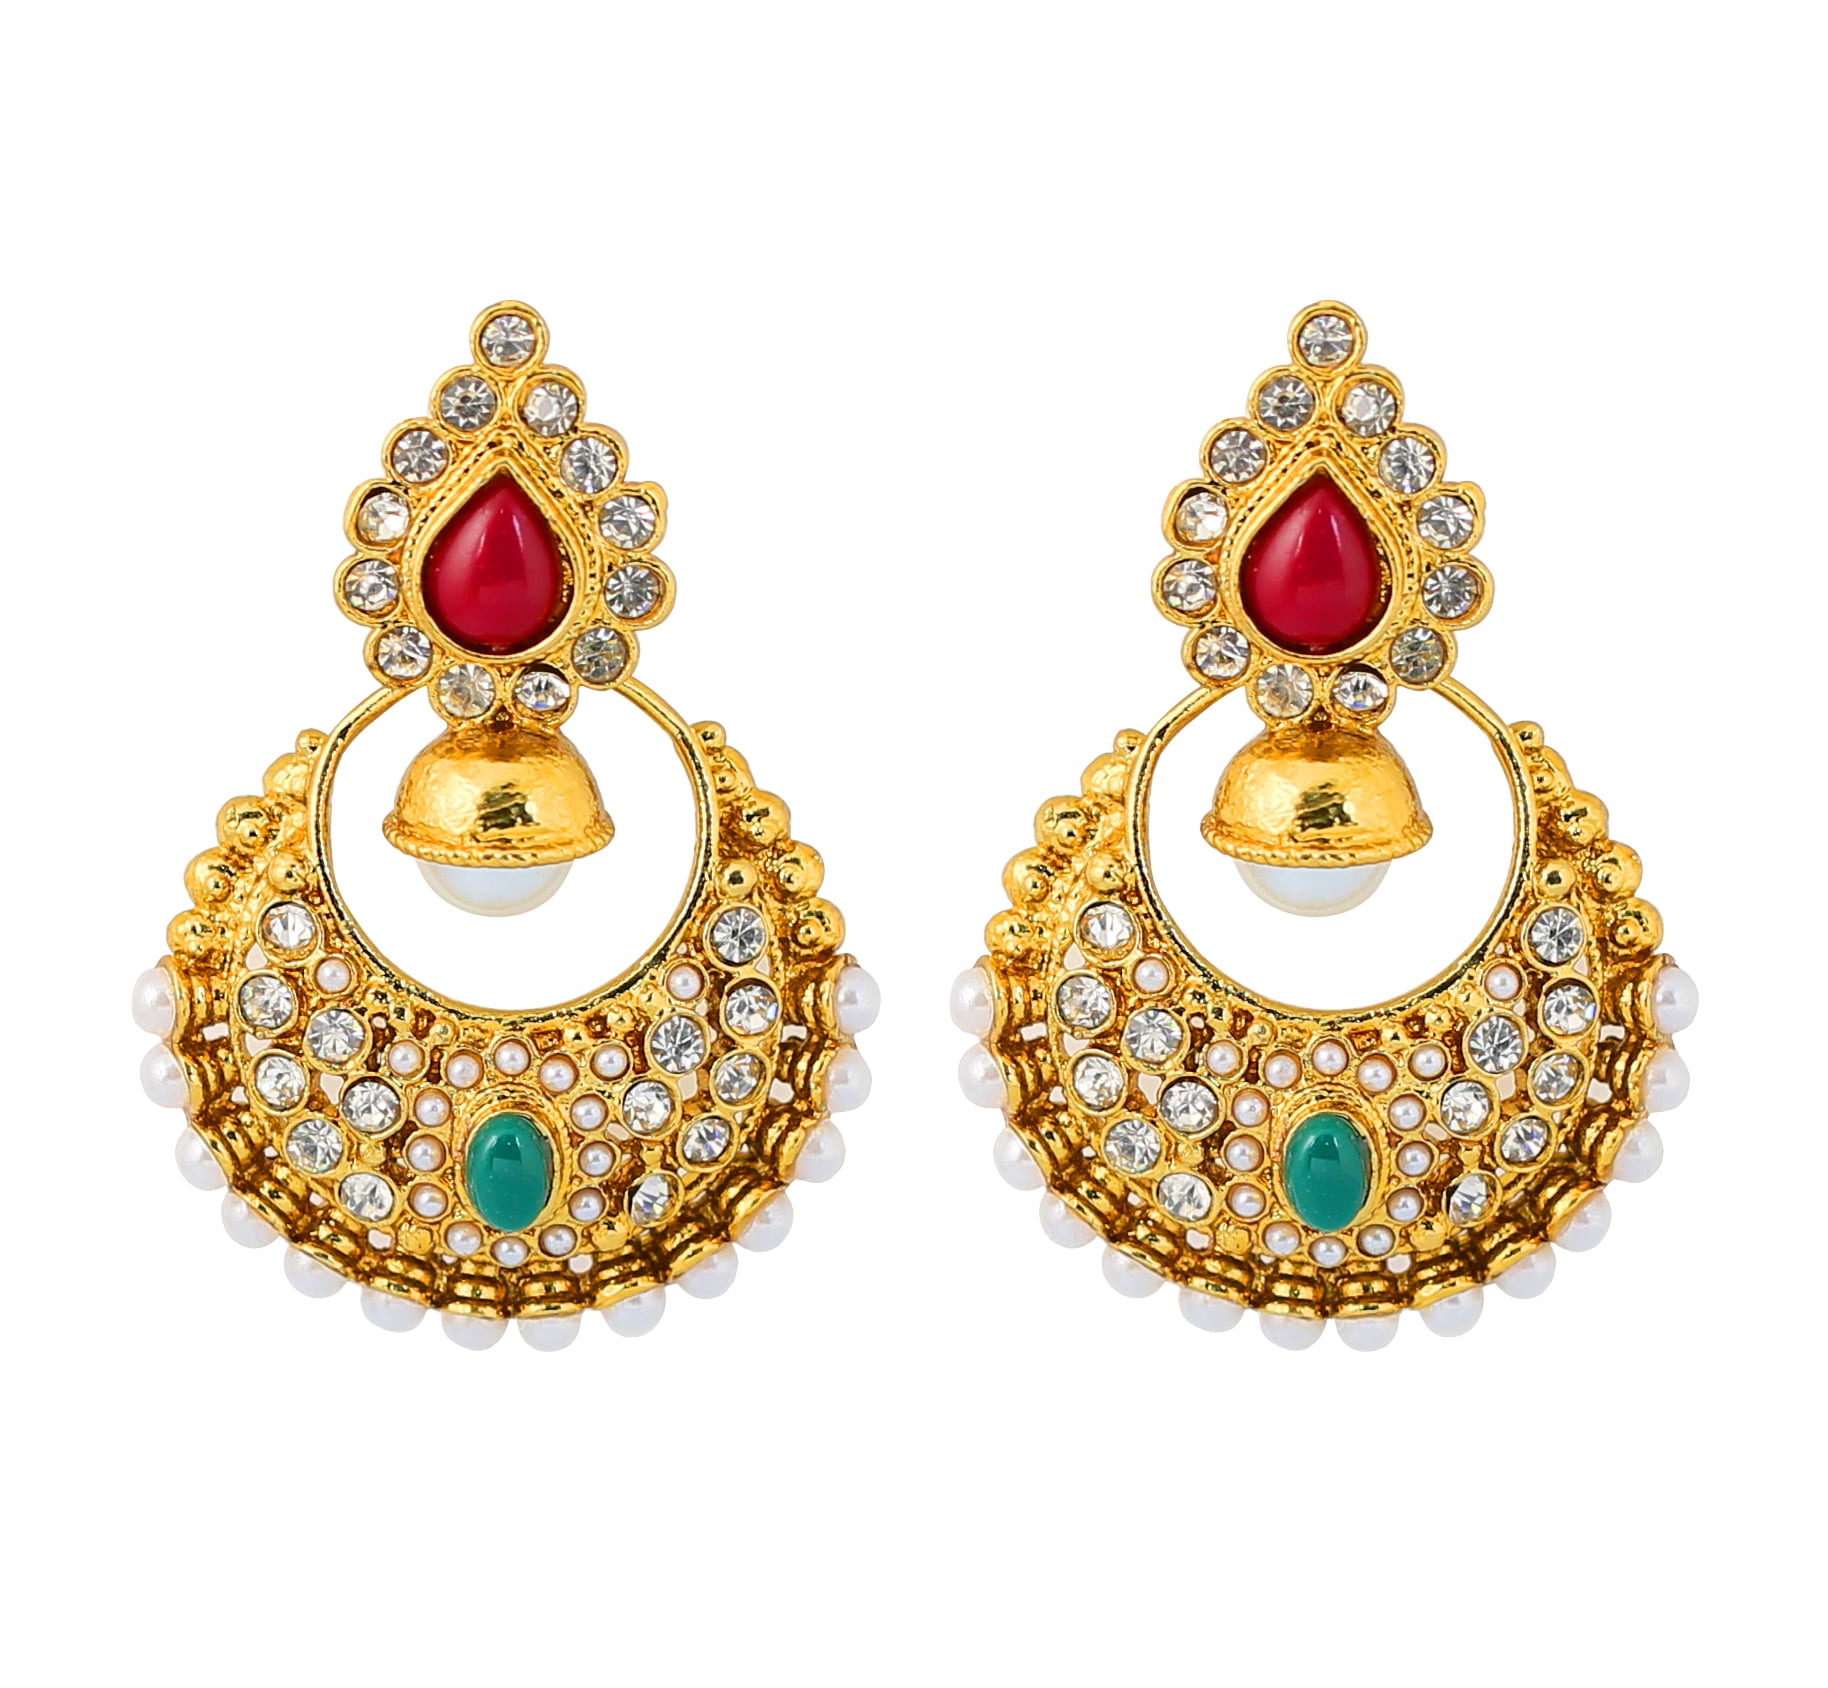 Sunsoul by Touchstone Indian Bollywood Chandbali Moon Kundan polki faux  pearls and faux turquoise blue Rhinestone long bridal designer jewelry  chandelier earrings for women in gold tone - Walmart.com